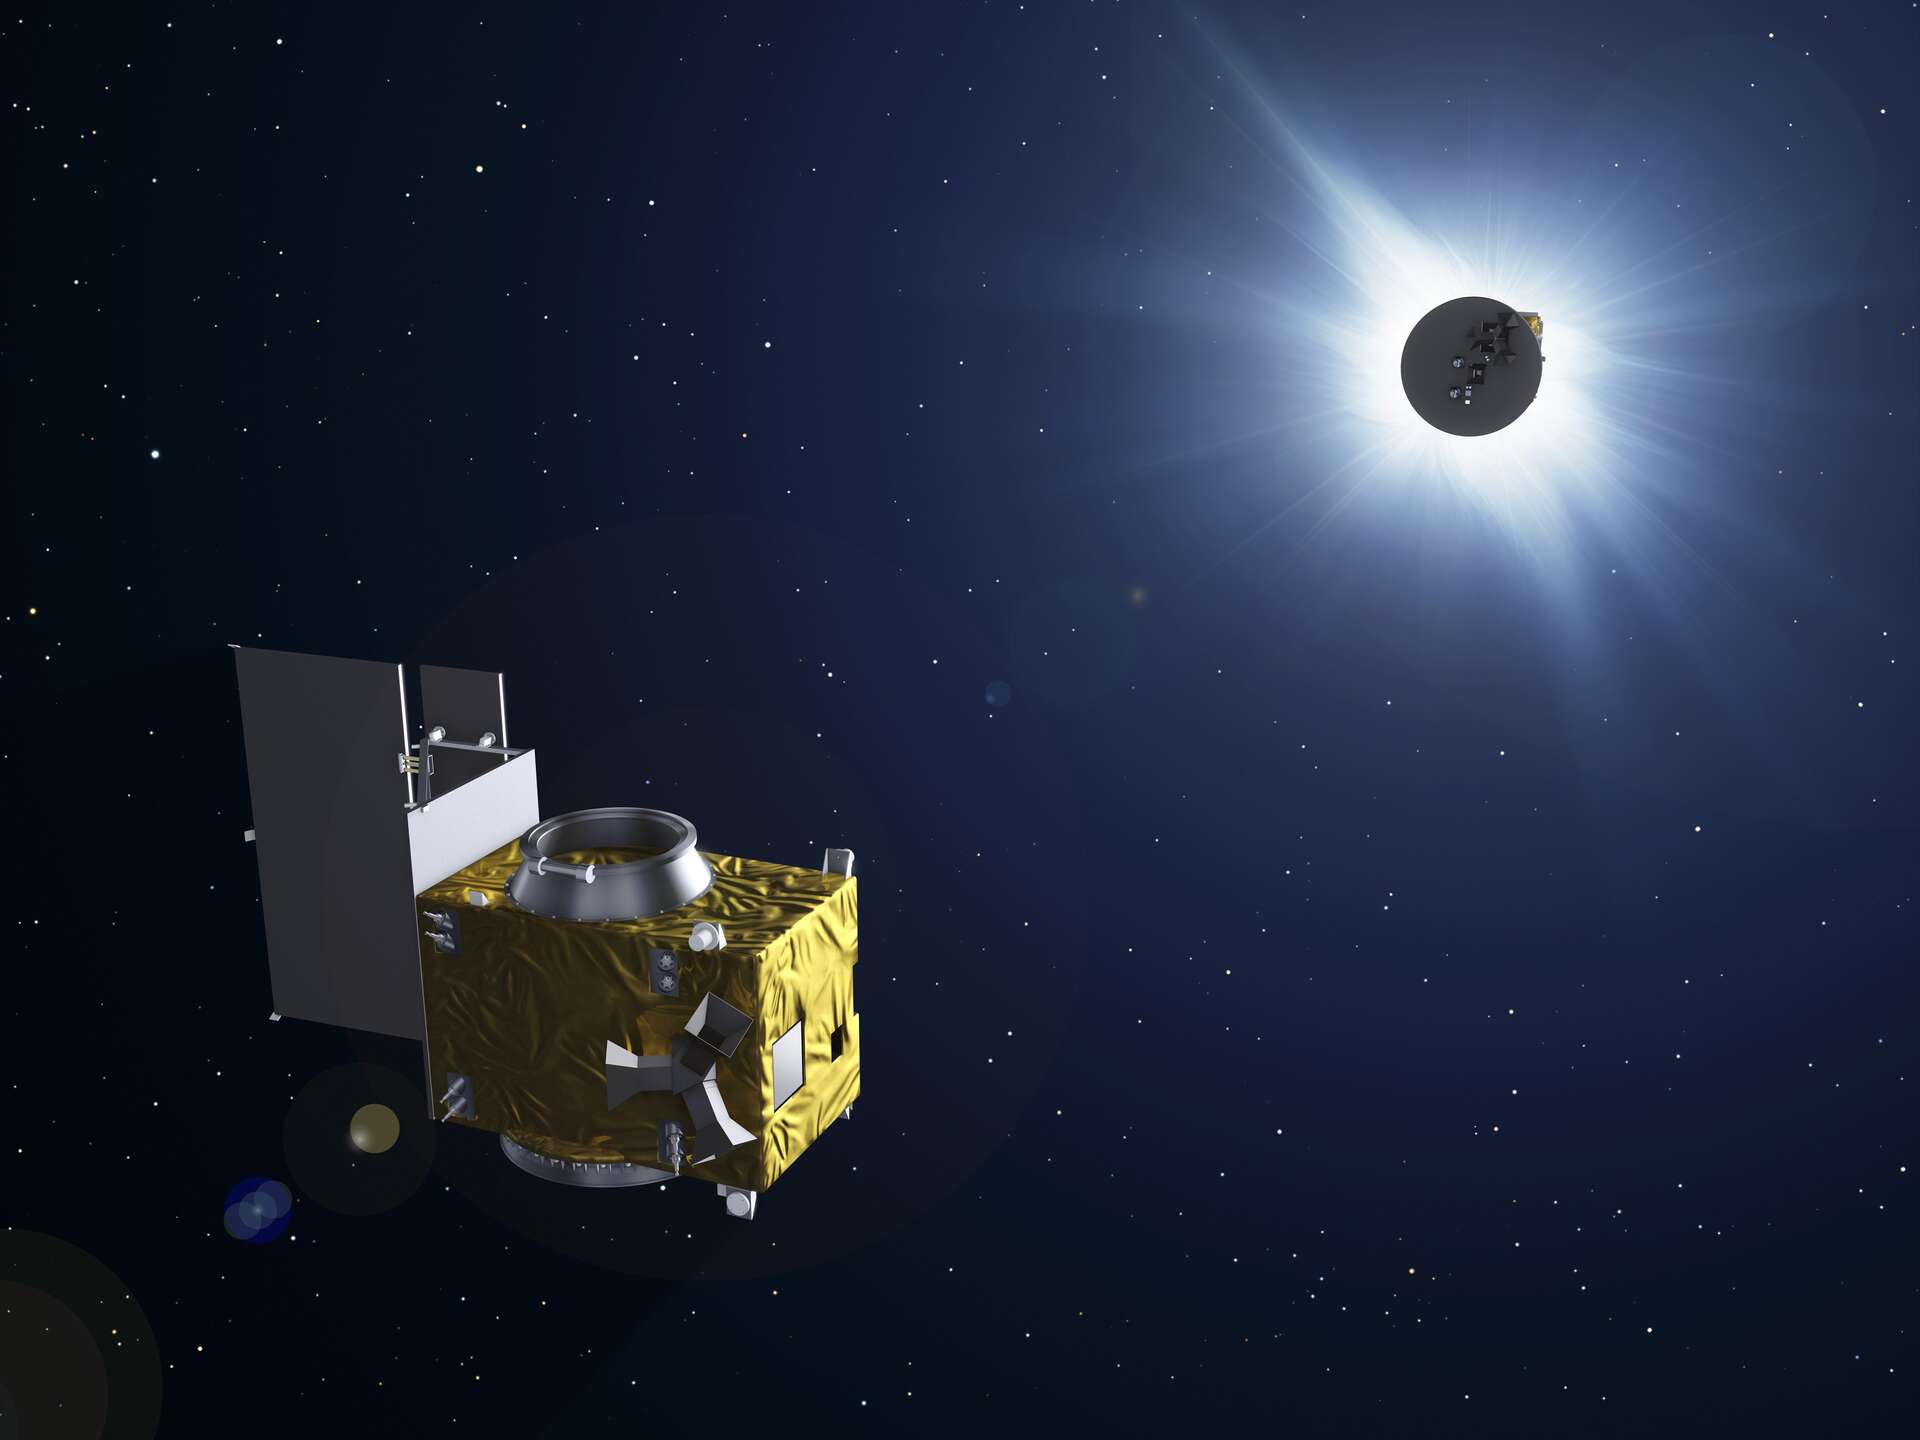 The duo of satellites will eclipse the Sun for several hours!